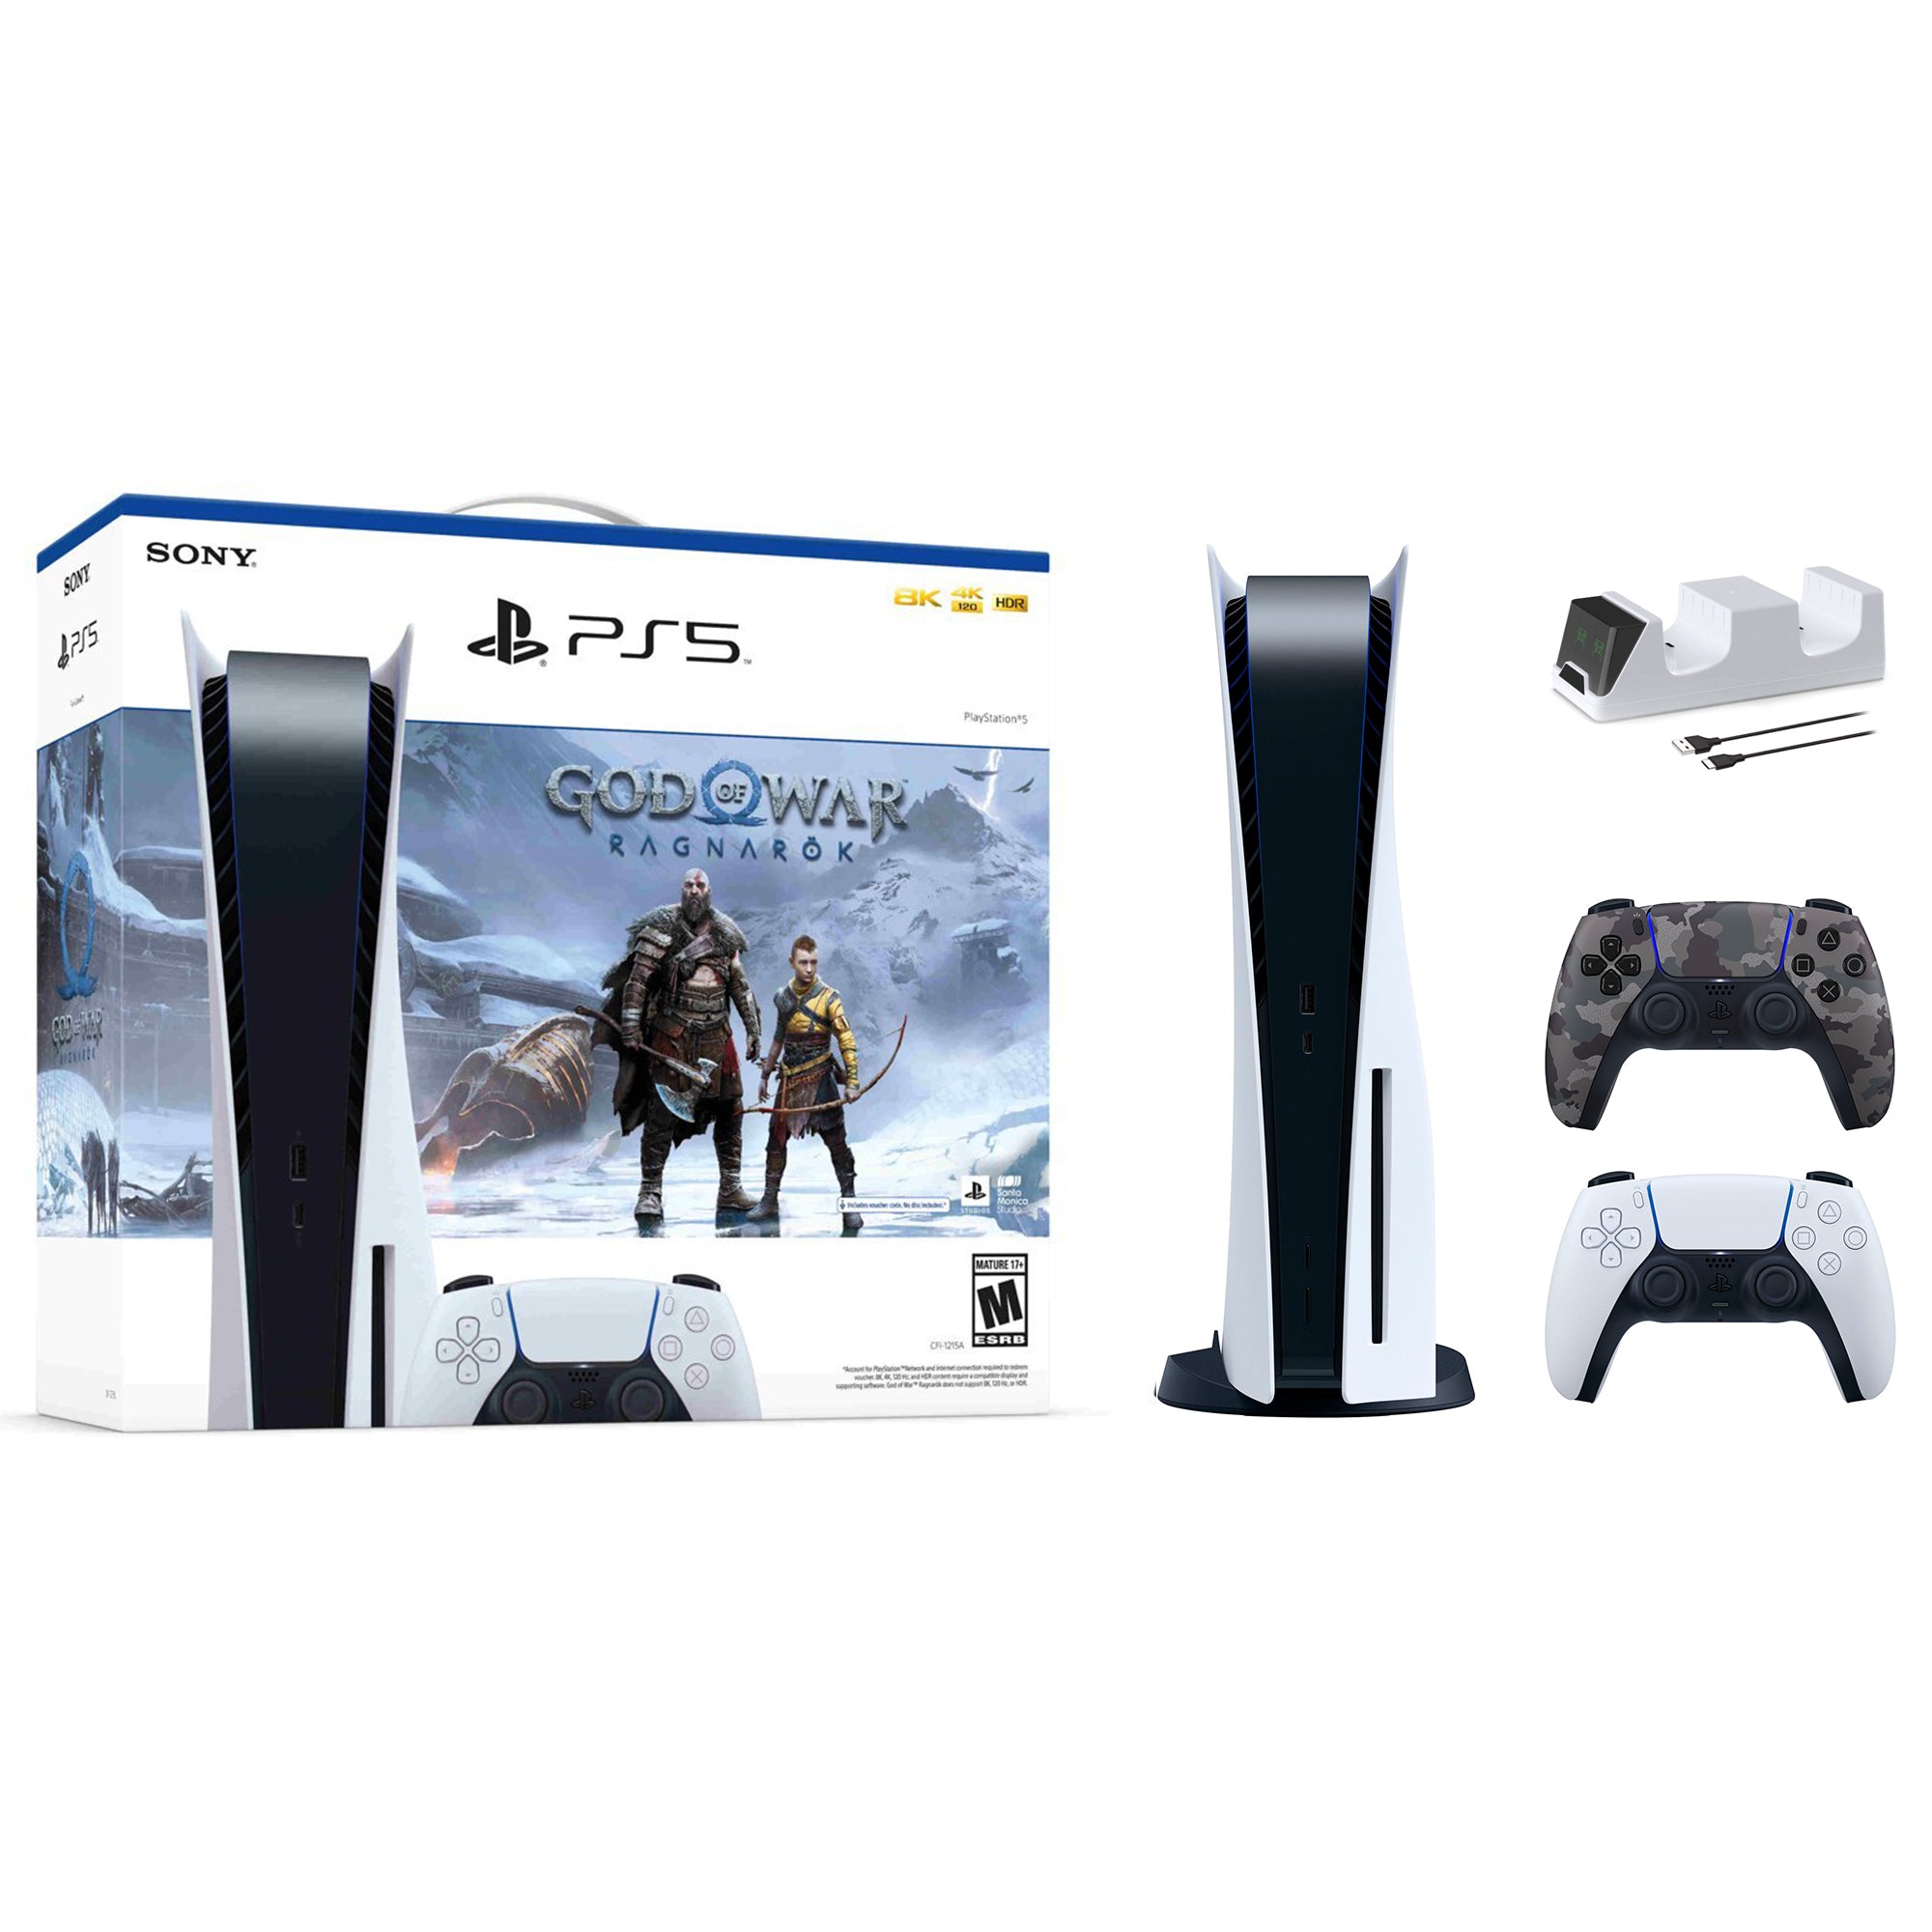 PlayStation 5 Disc Edition God of War Ragnarok Bundle with Two Controllers White and Gray Camouflage DualSense and Mytrix Dual Controller Charger